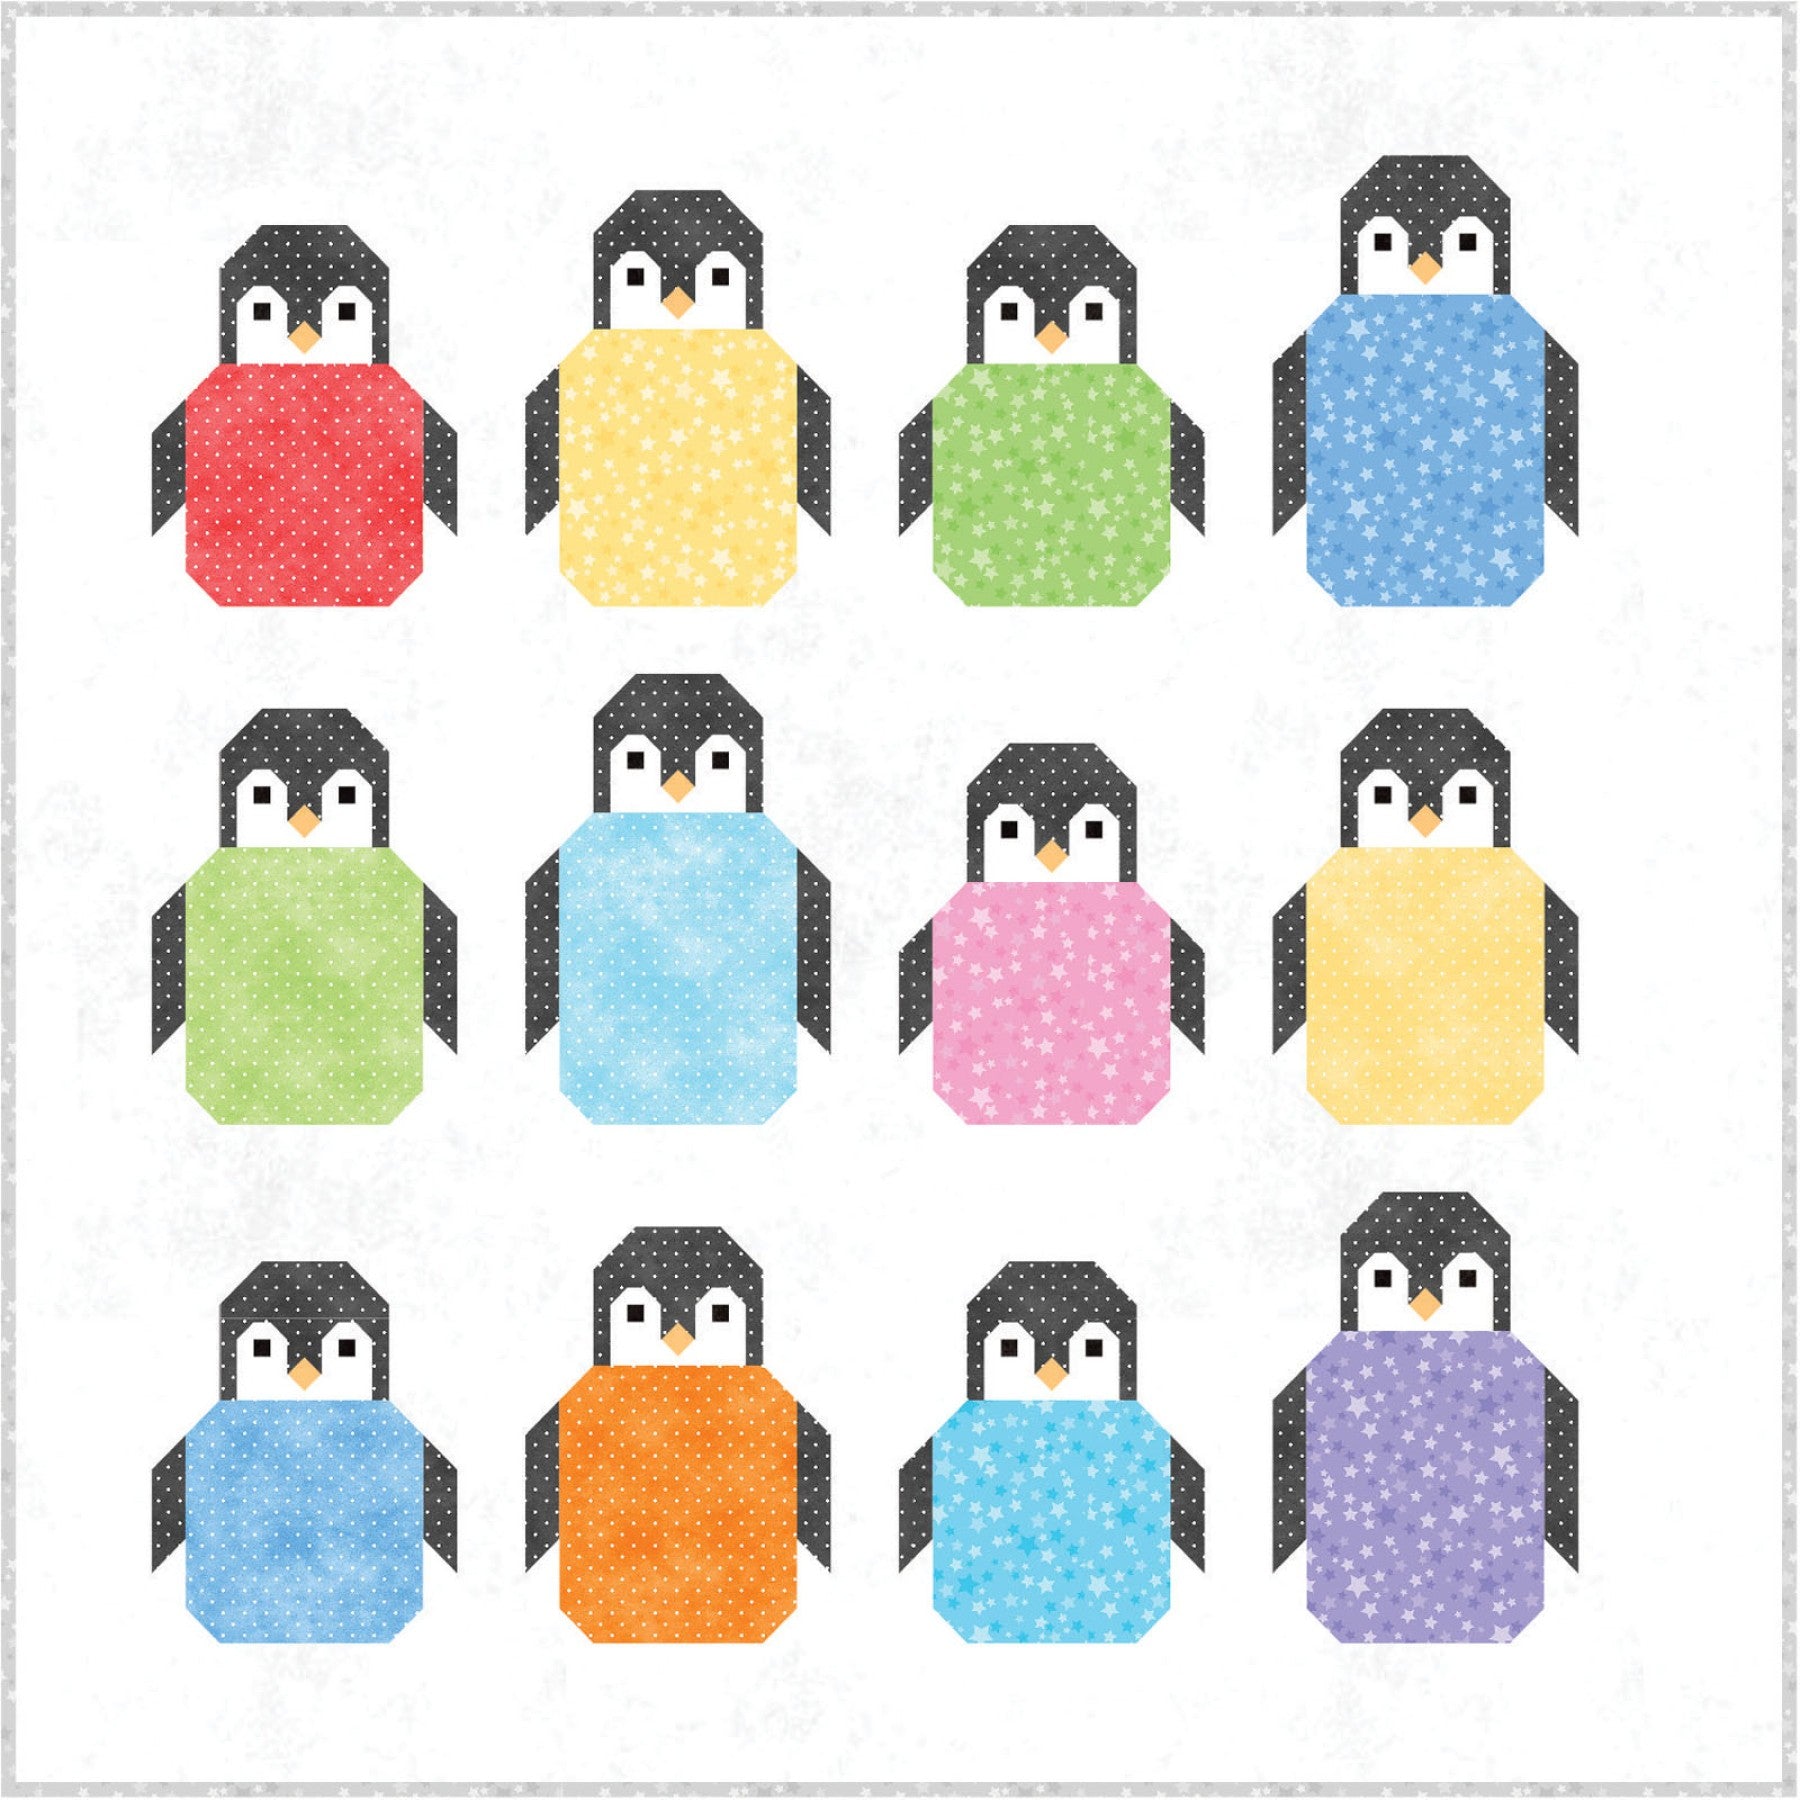 Penguin Party Flannel Quilt Kit-Maywood Studio-My Favorite Quilt Store